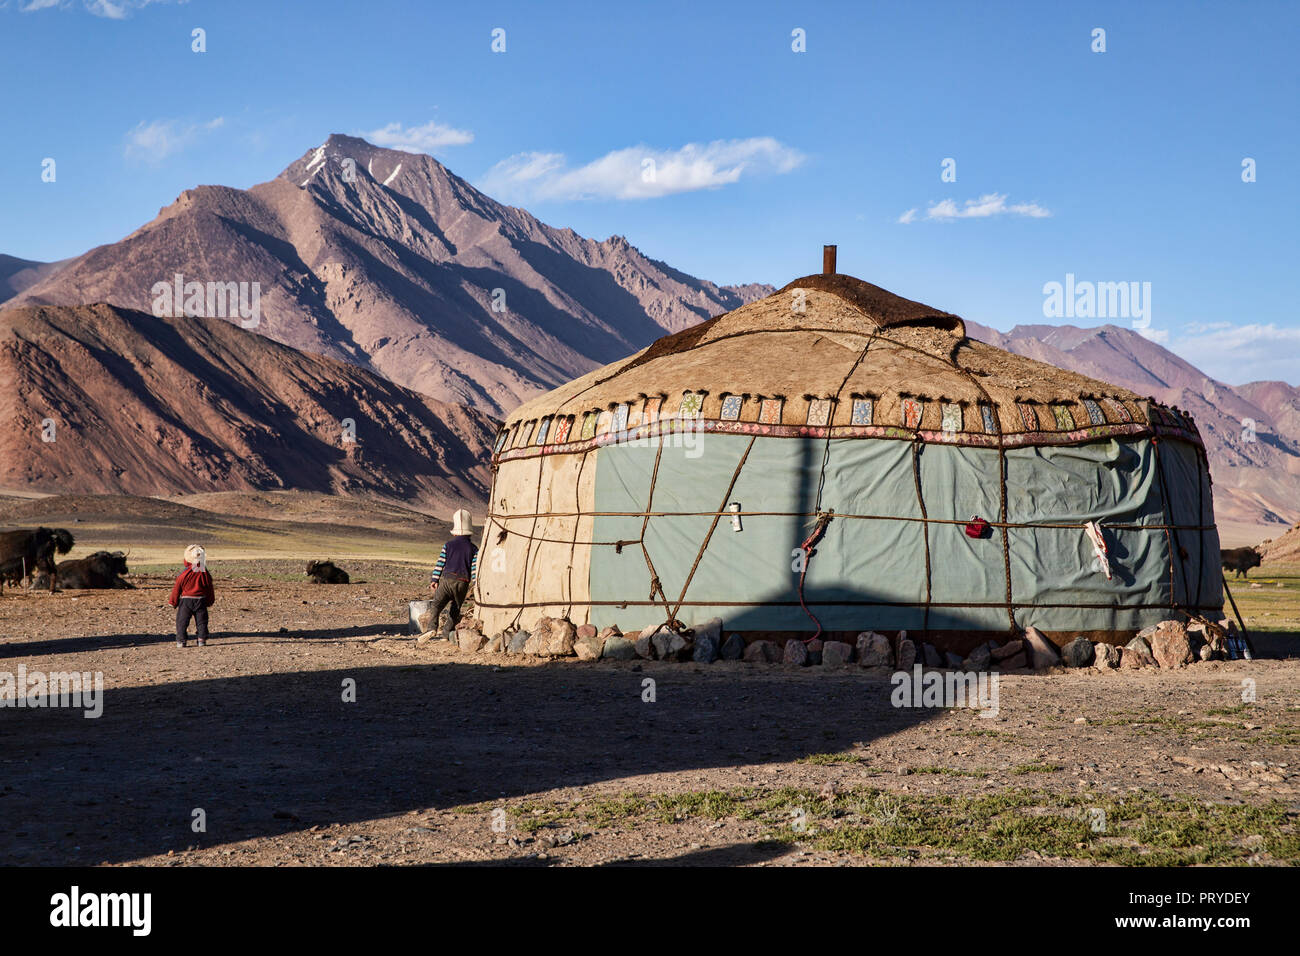 2 young Kyrgyz boys stand next to yurt during golden hour in the remote Pshart Valley in the Pamirs, Gorno-Badakhshan Autonomous Region, Tajikistan. Stock Photo